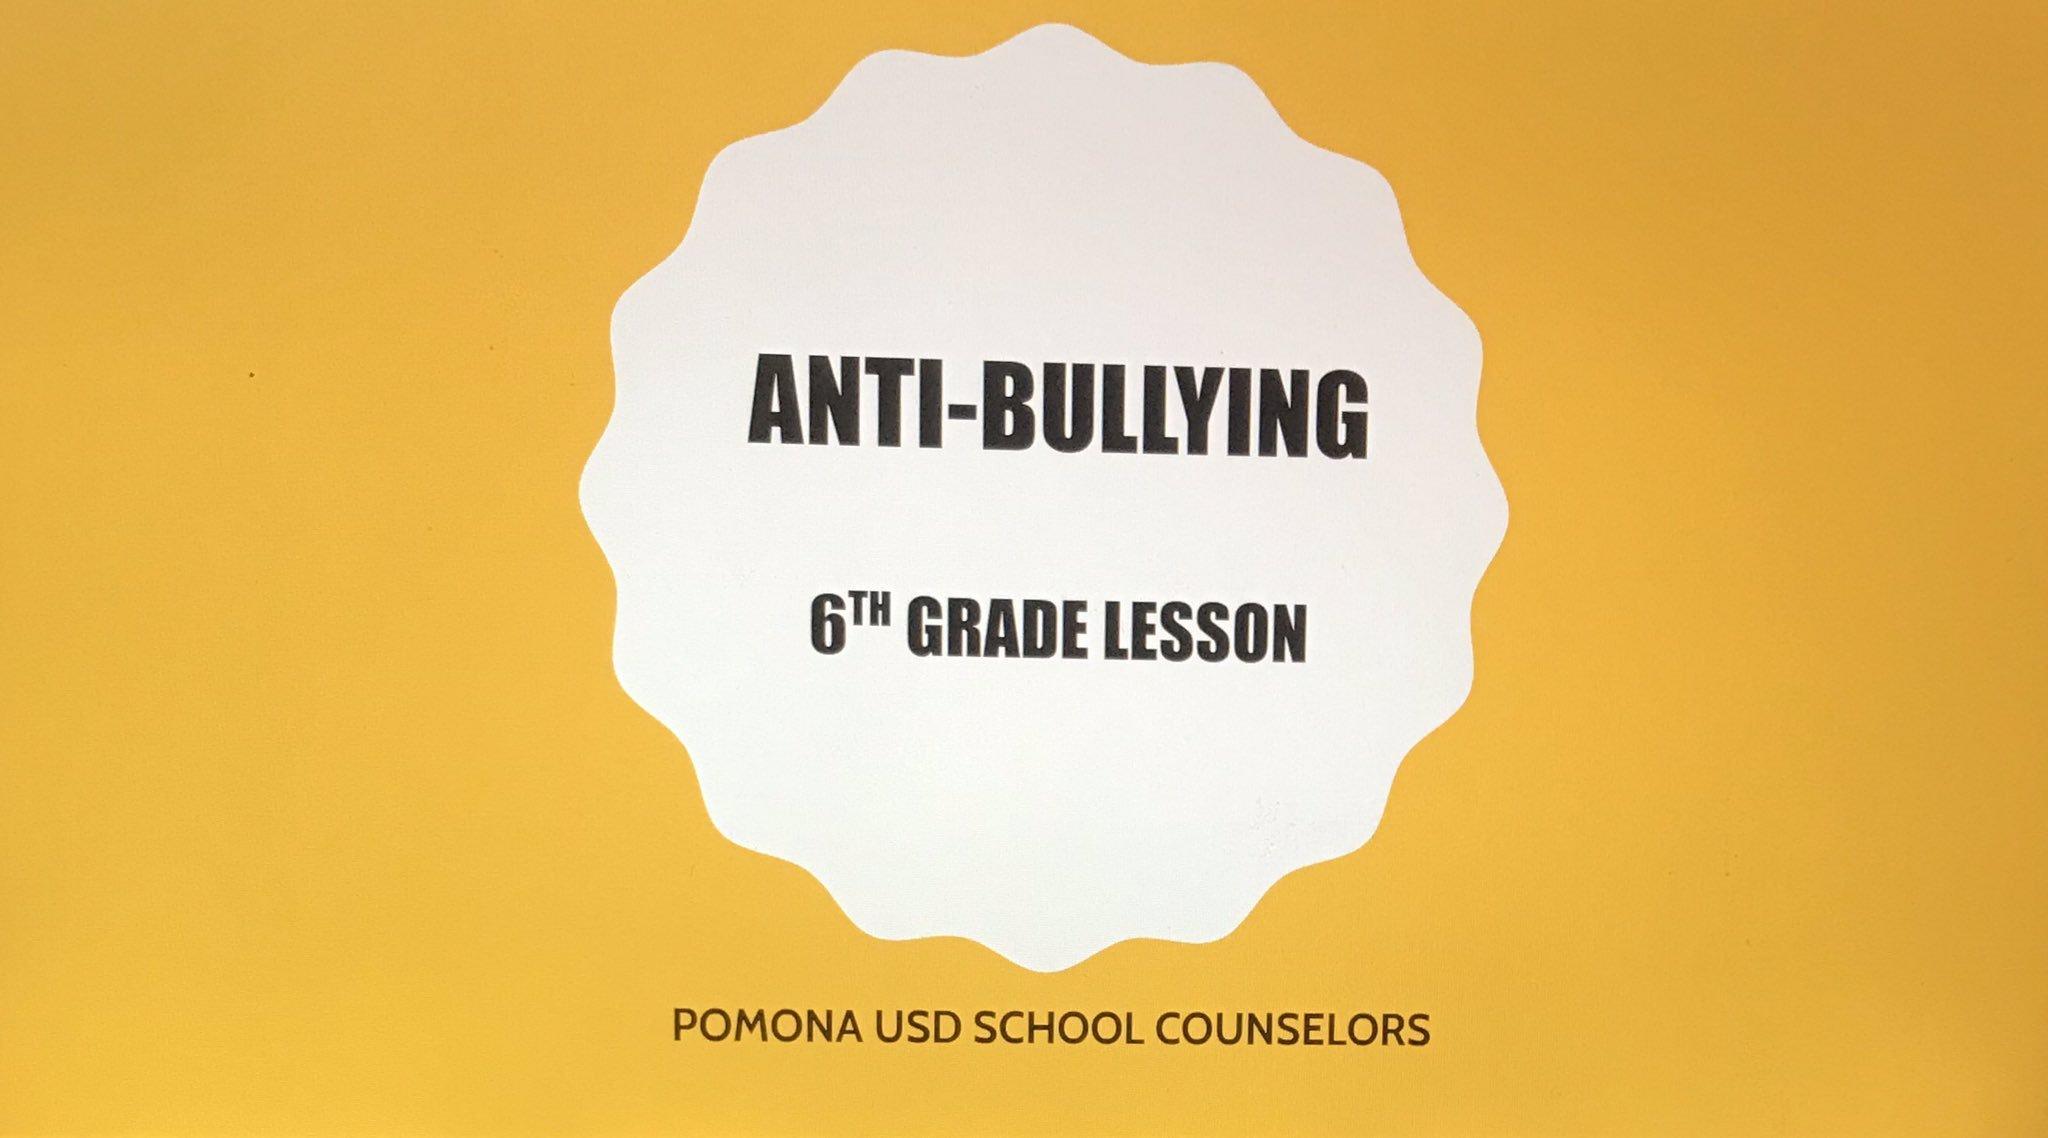 In honor of October being bullying prevention month, all 97 of our 6th grade Alcott Eagles received an Anti-Bullying Lesson. #proud2bePUSD #elementaryschoolcounseling